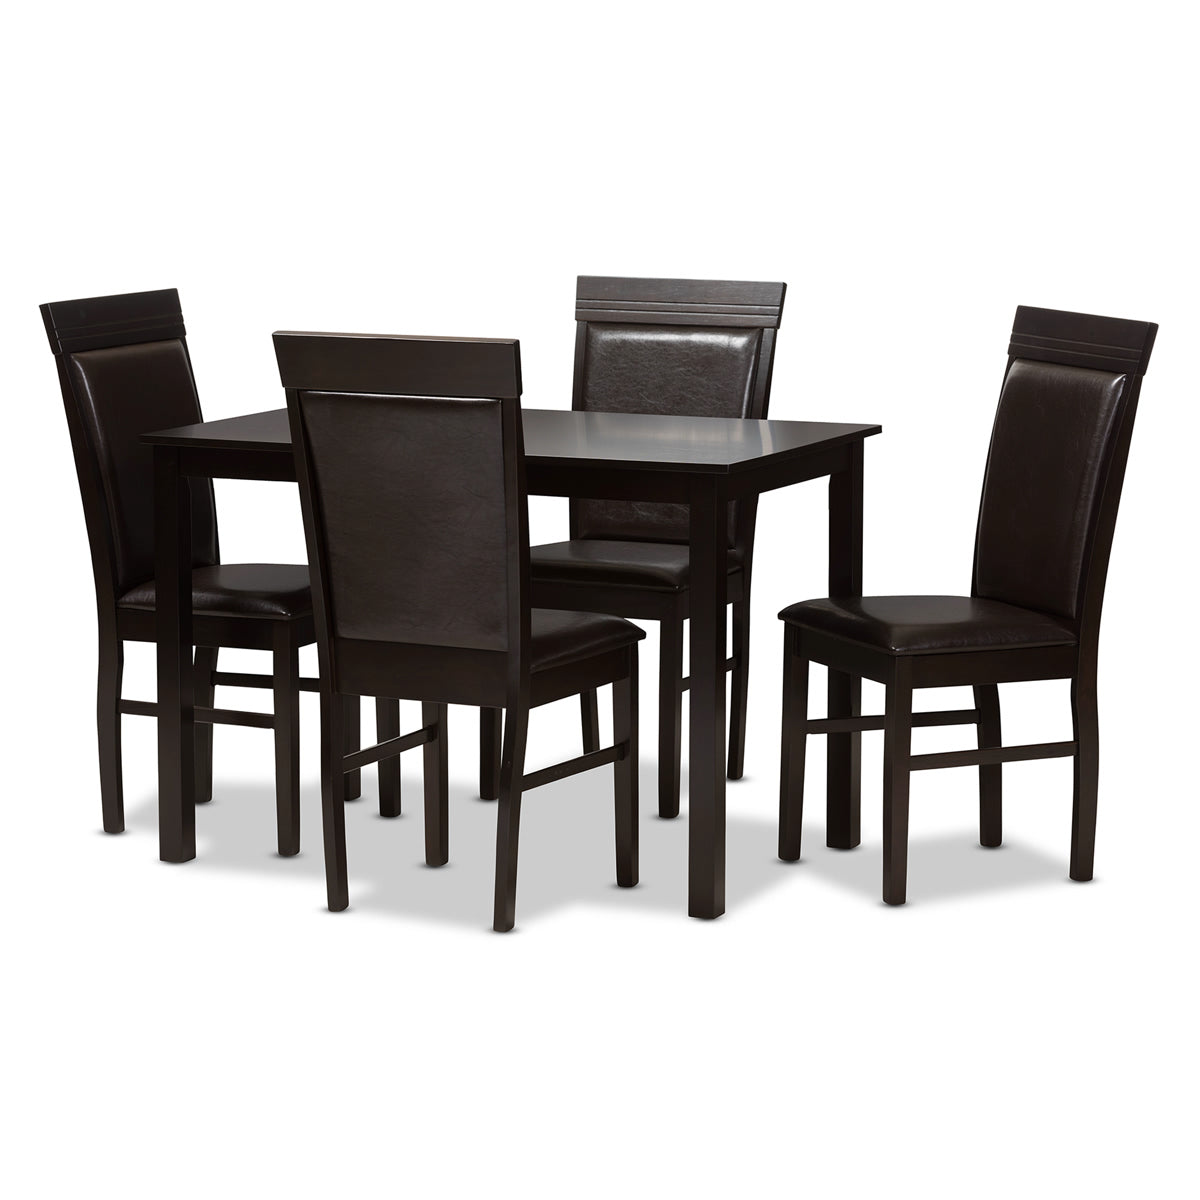 Baxton Studio Thea Modern and Contemporary Dark Brown Faux Leather Upholstered 5-Piece Dining Set Baxton Studio-0-Minimal And Modern - 1